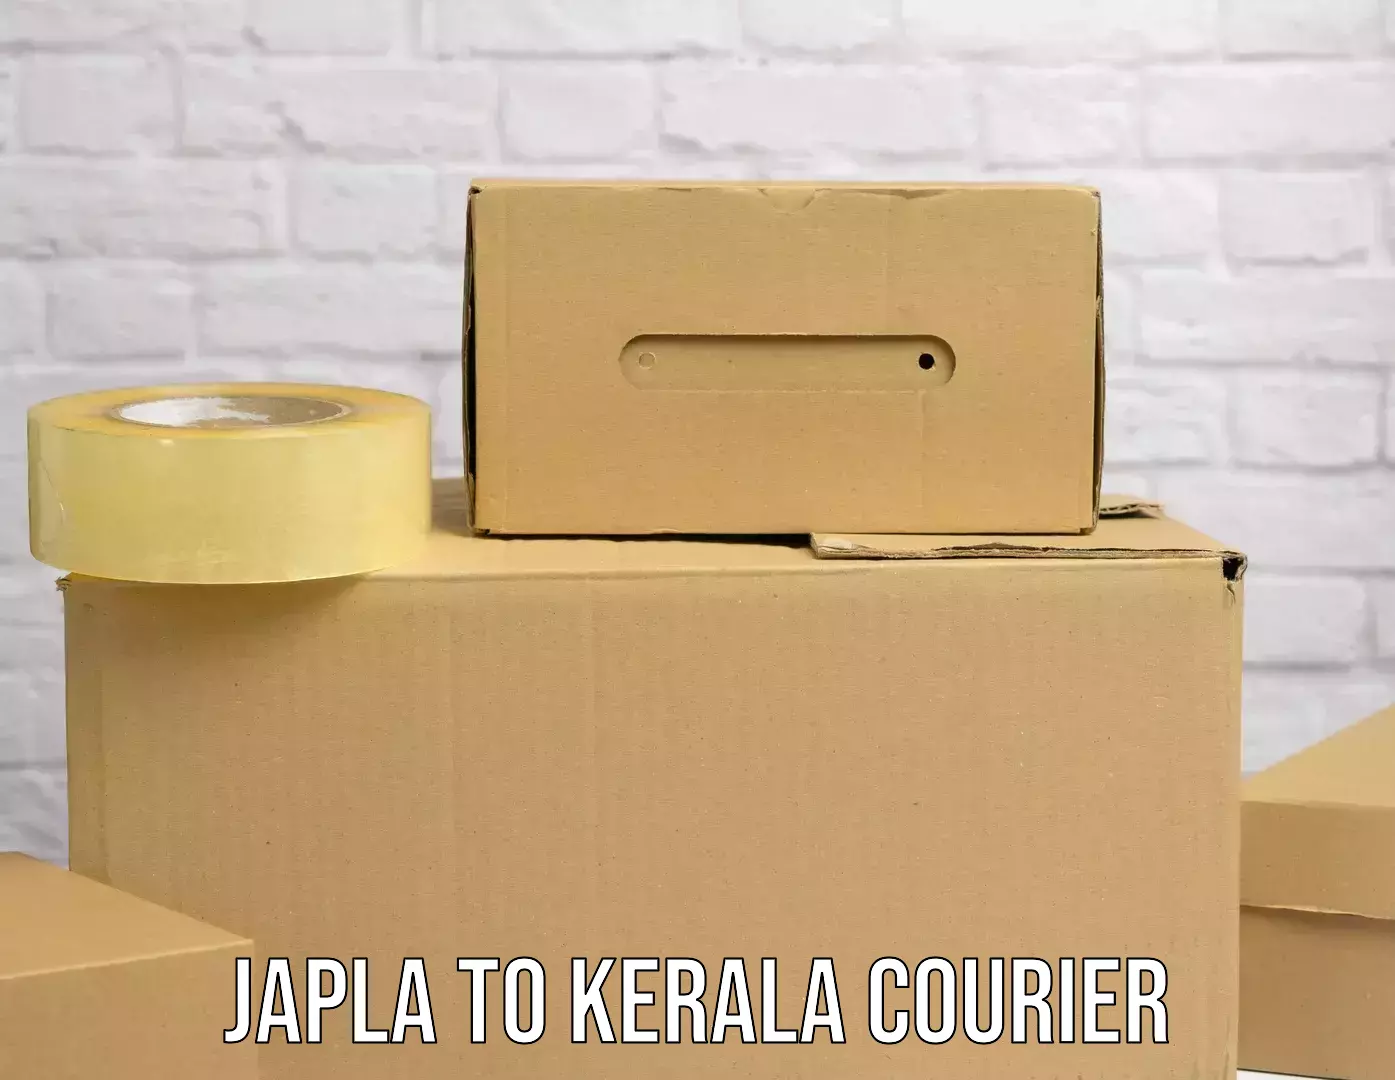 On-call courier service Japla to Kerala